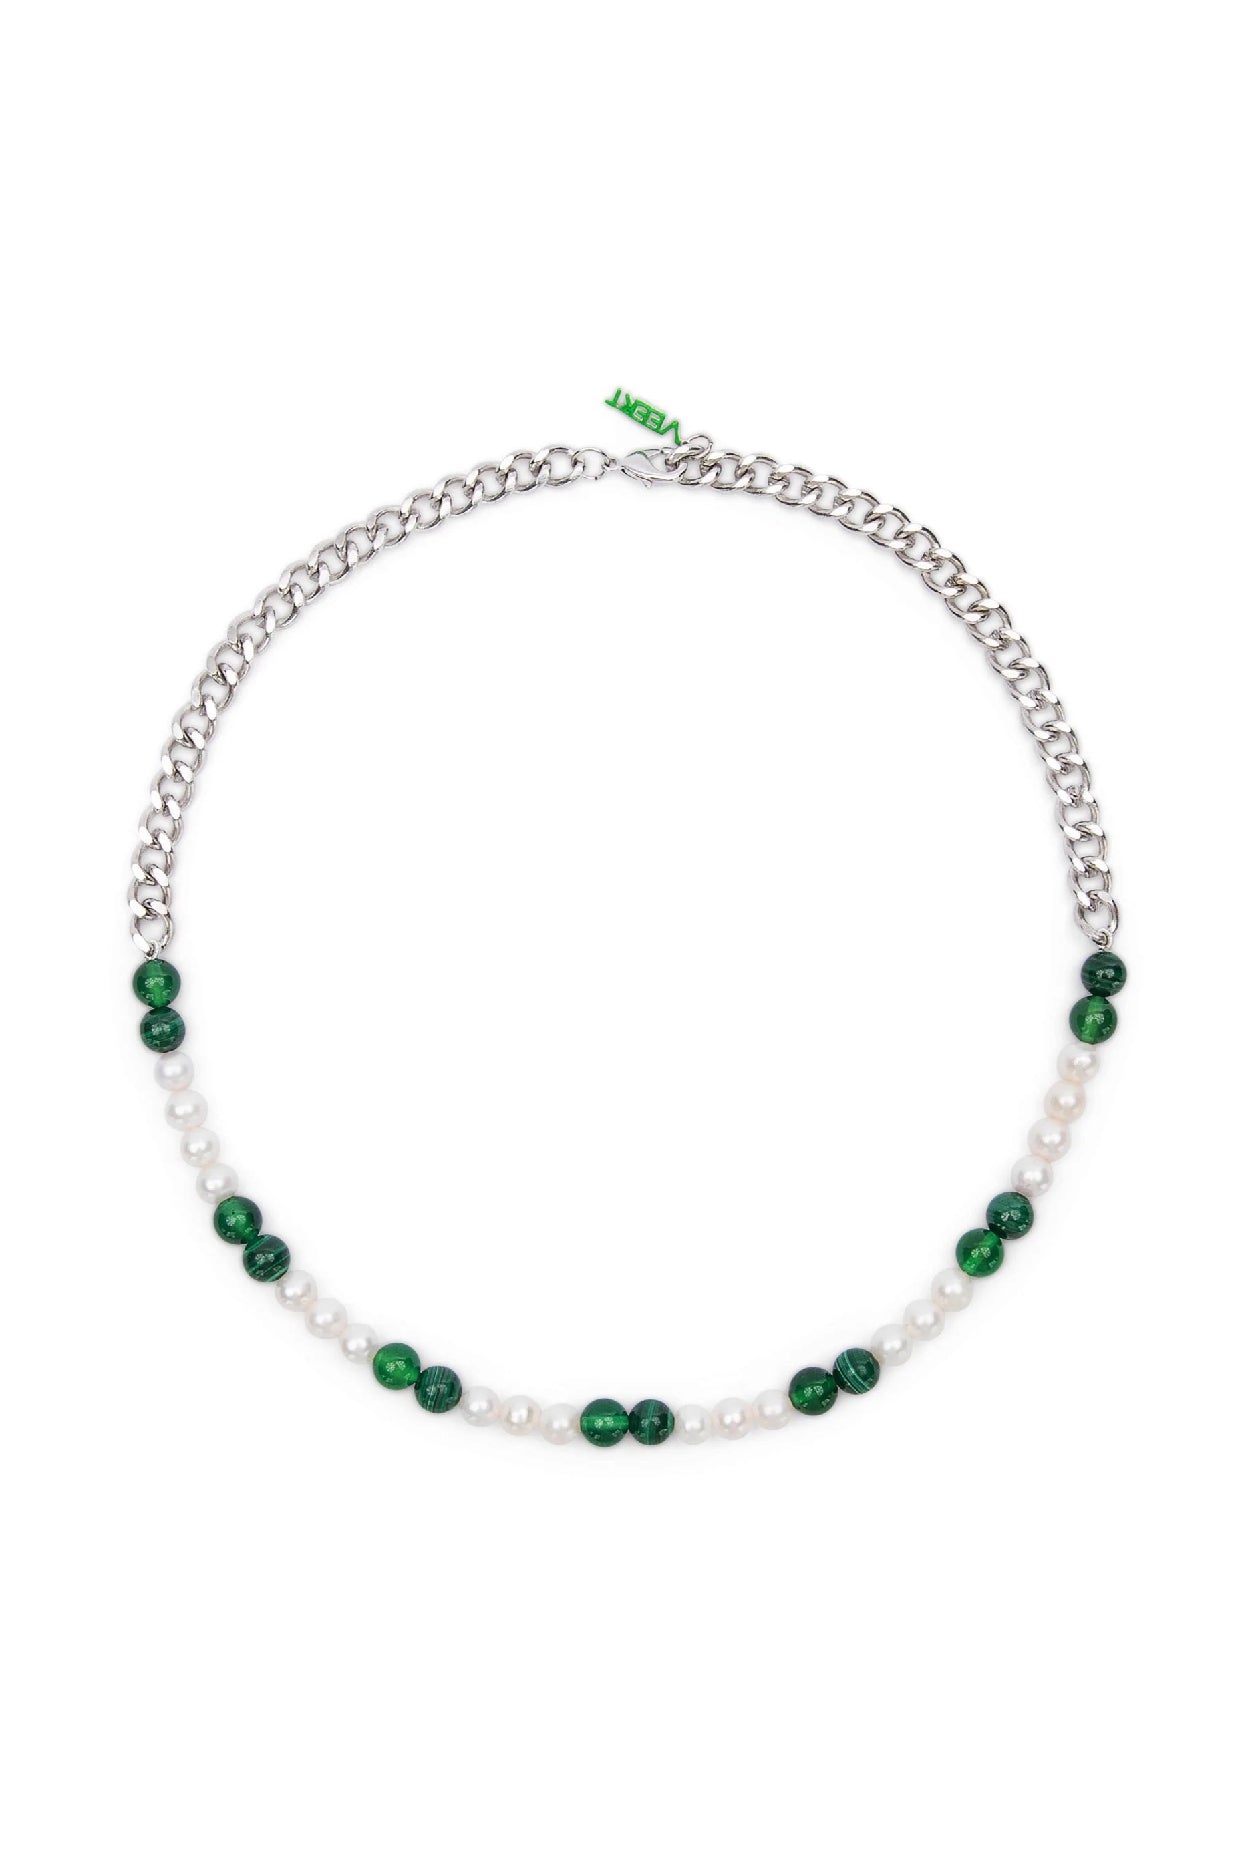 The Cuban Link Malachite Green Onyx & Freshwater Pearl Necklace